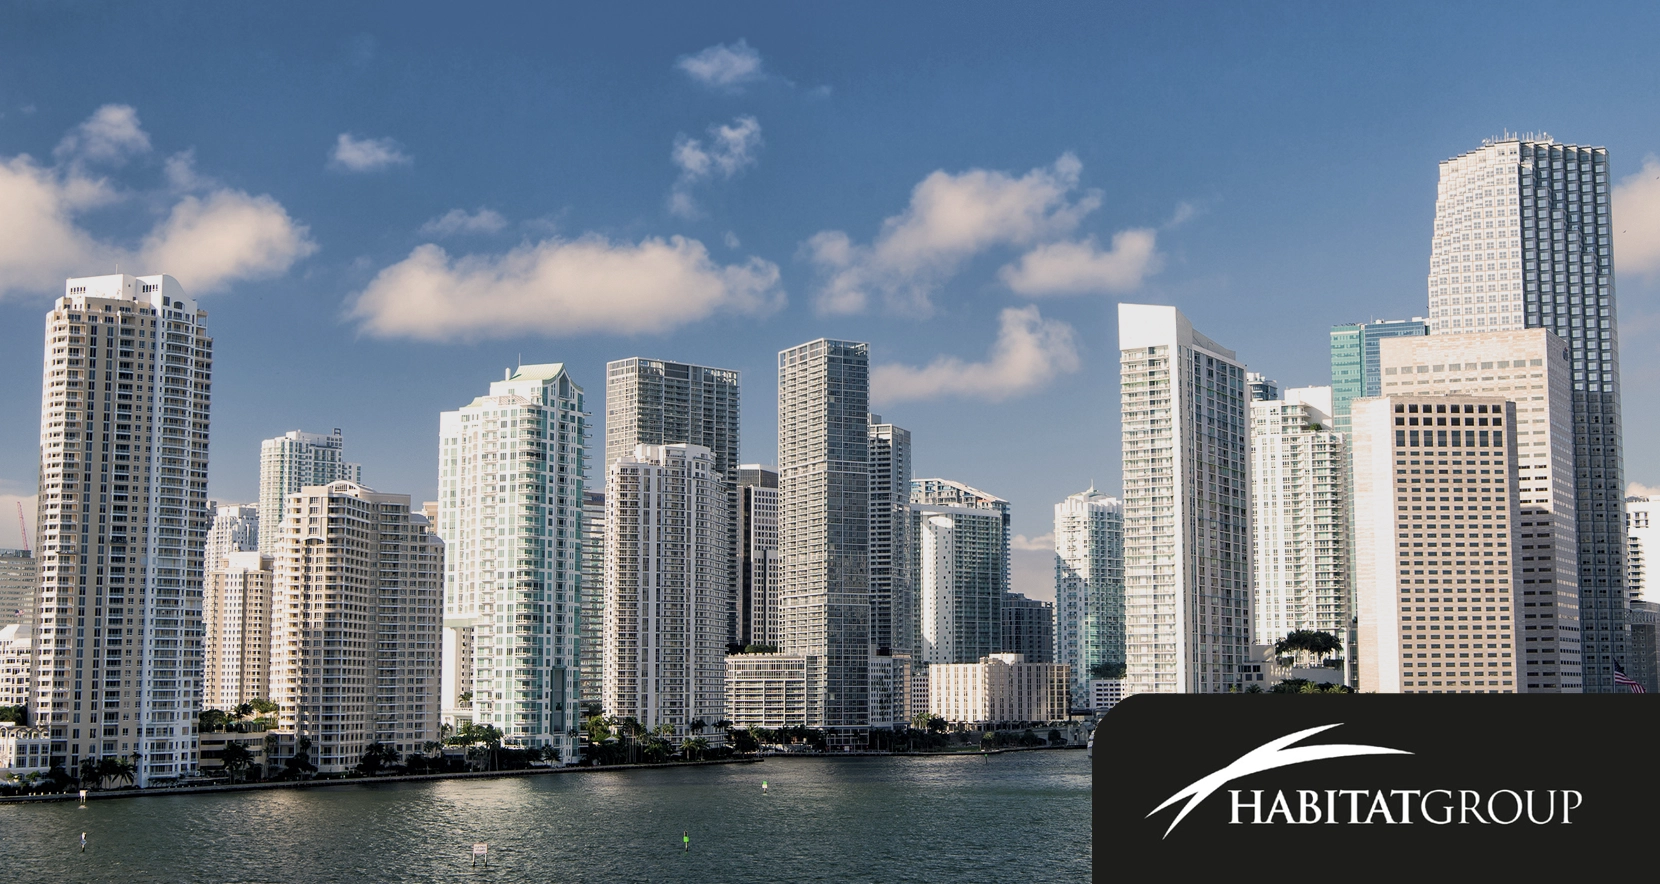 Why is Miami the new mecca for visionary investors?